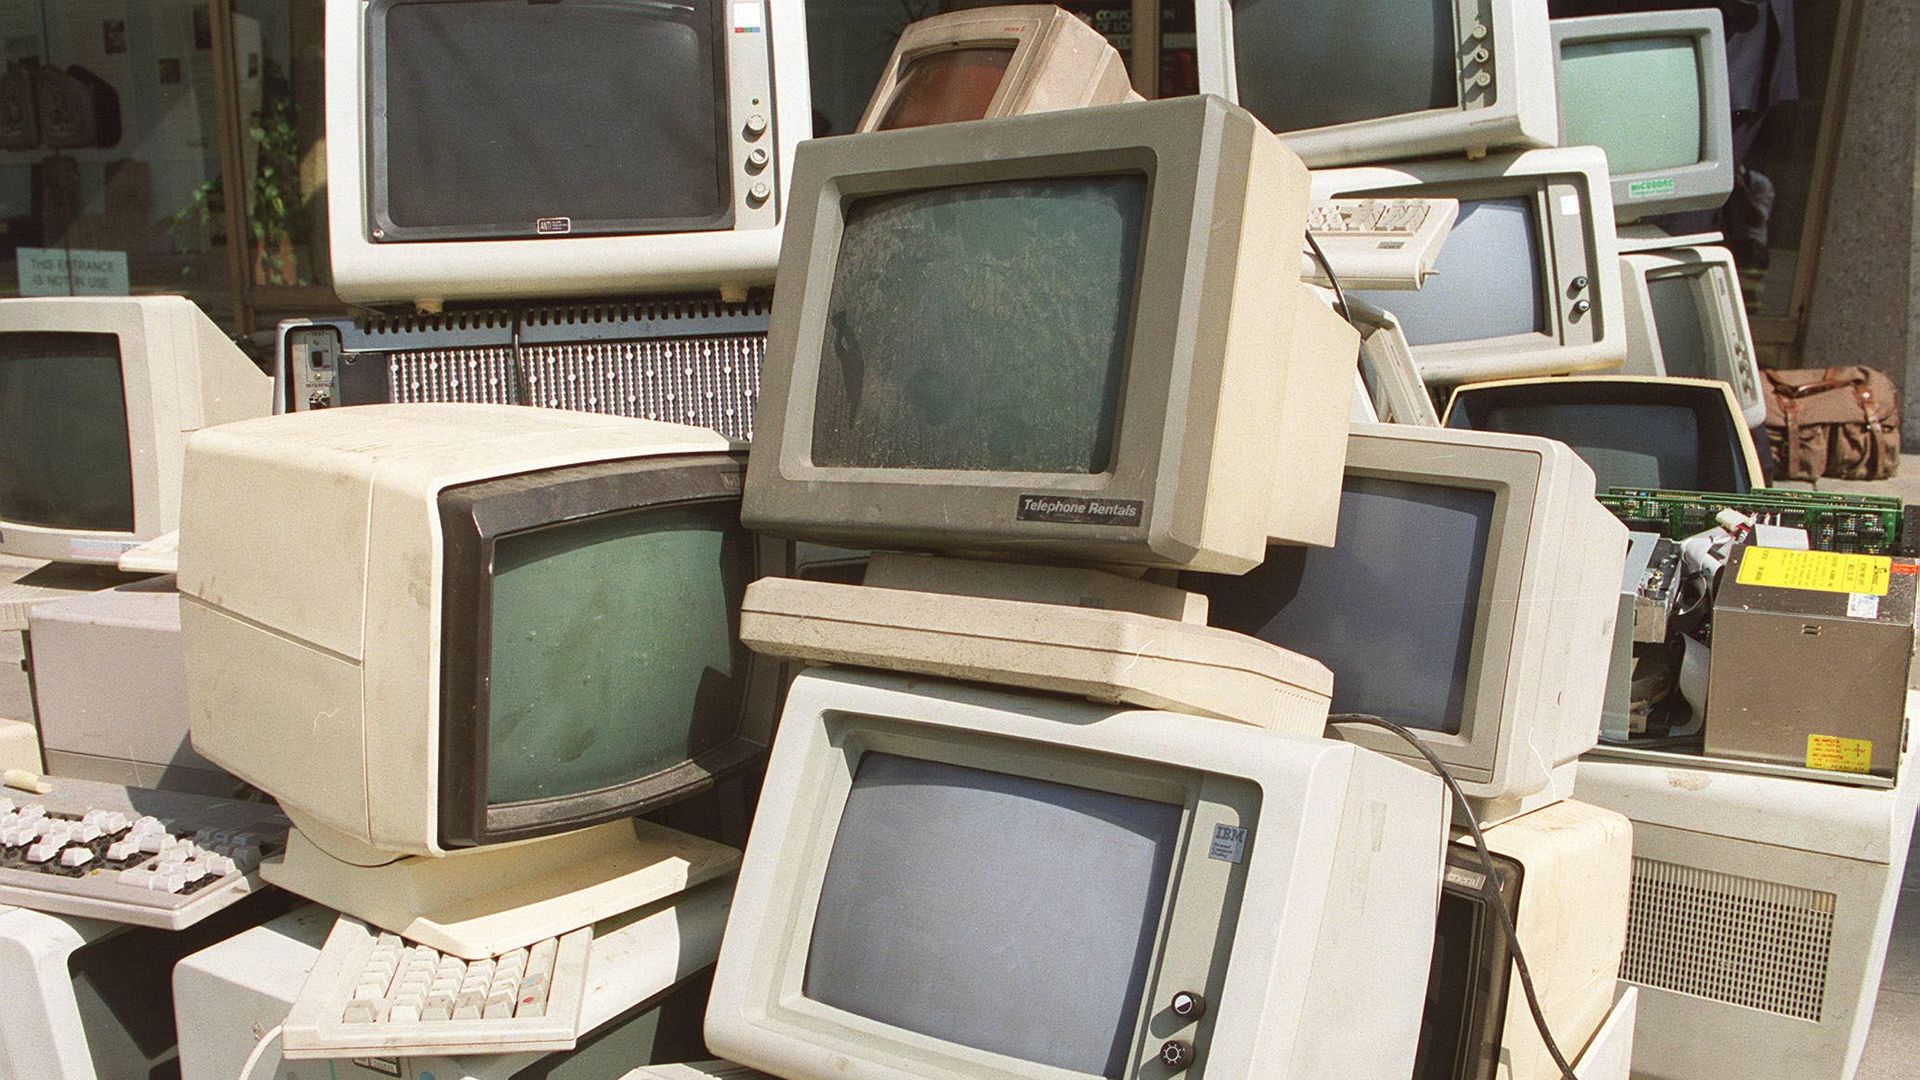 Waste computers from a 1990s photoshoot